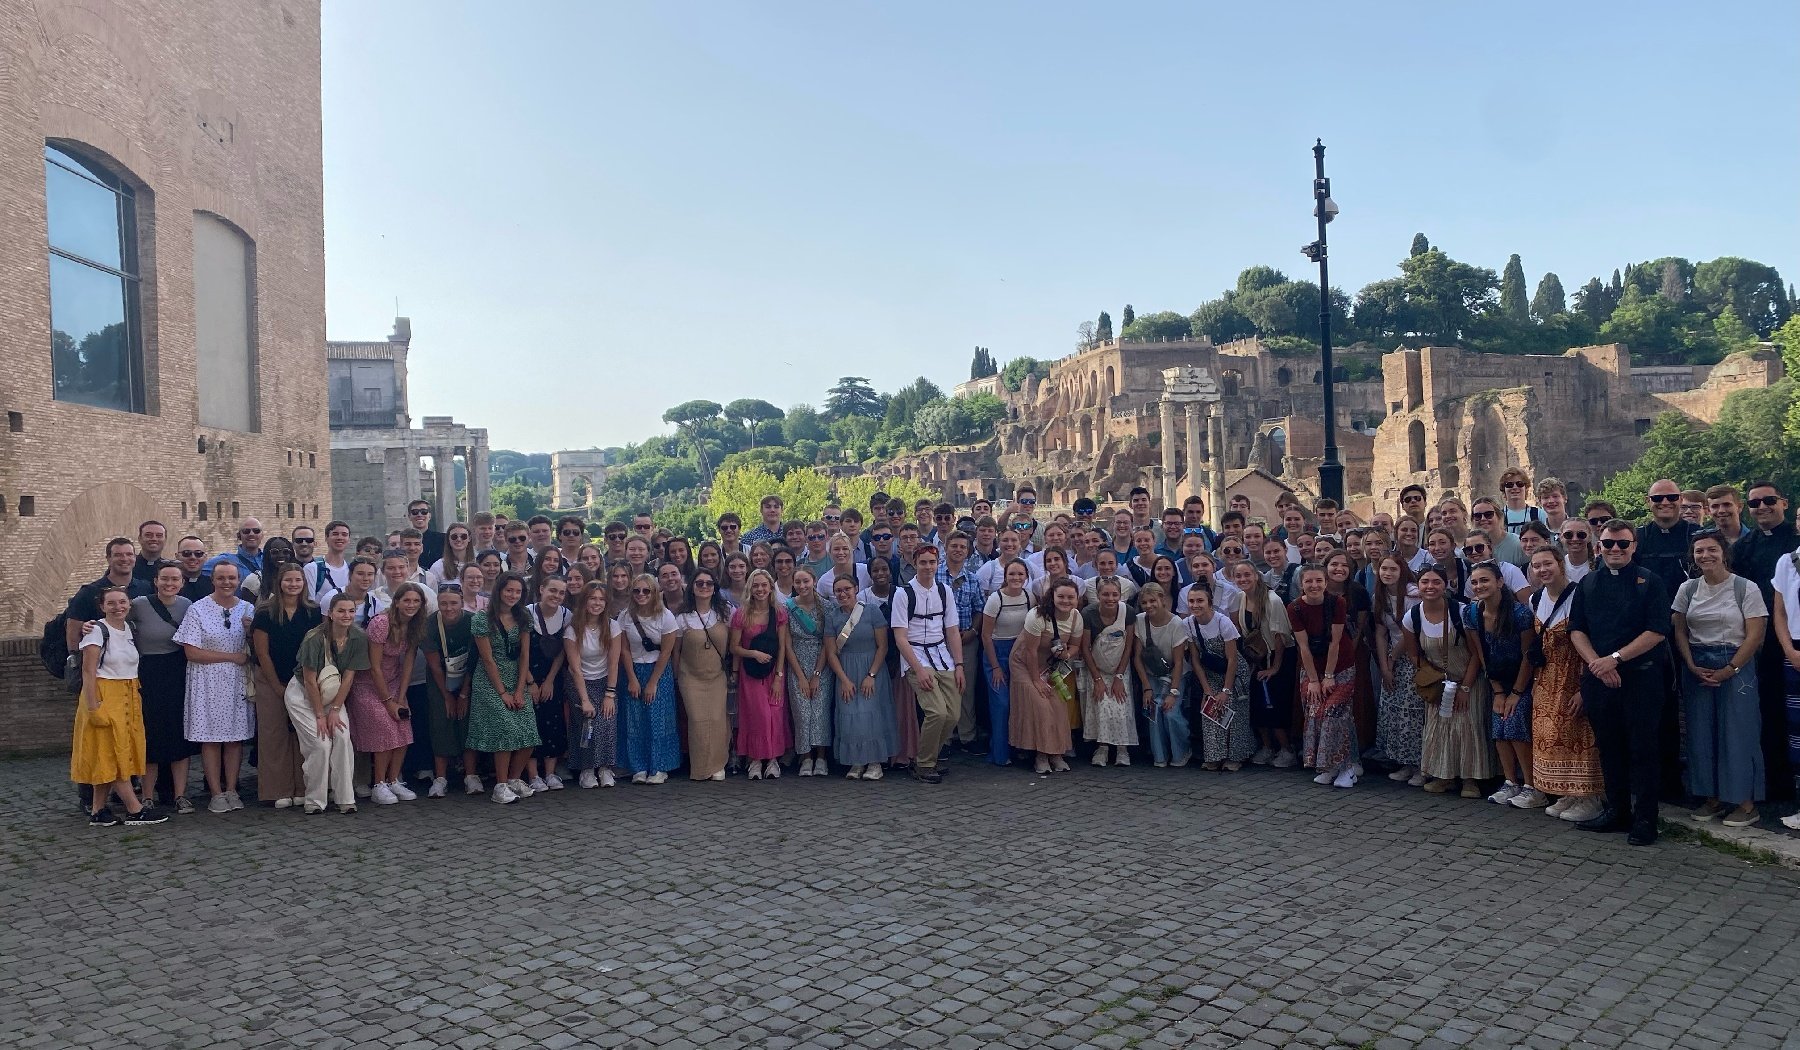 June 20: Forum, Colosseum, and Mary Major